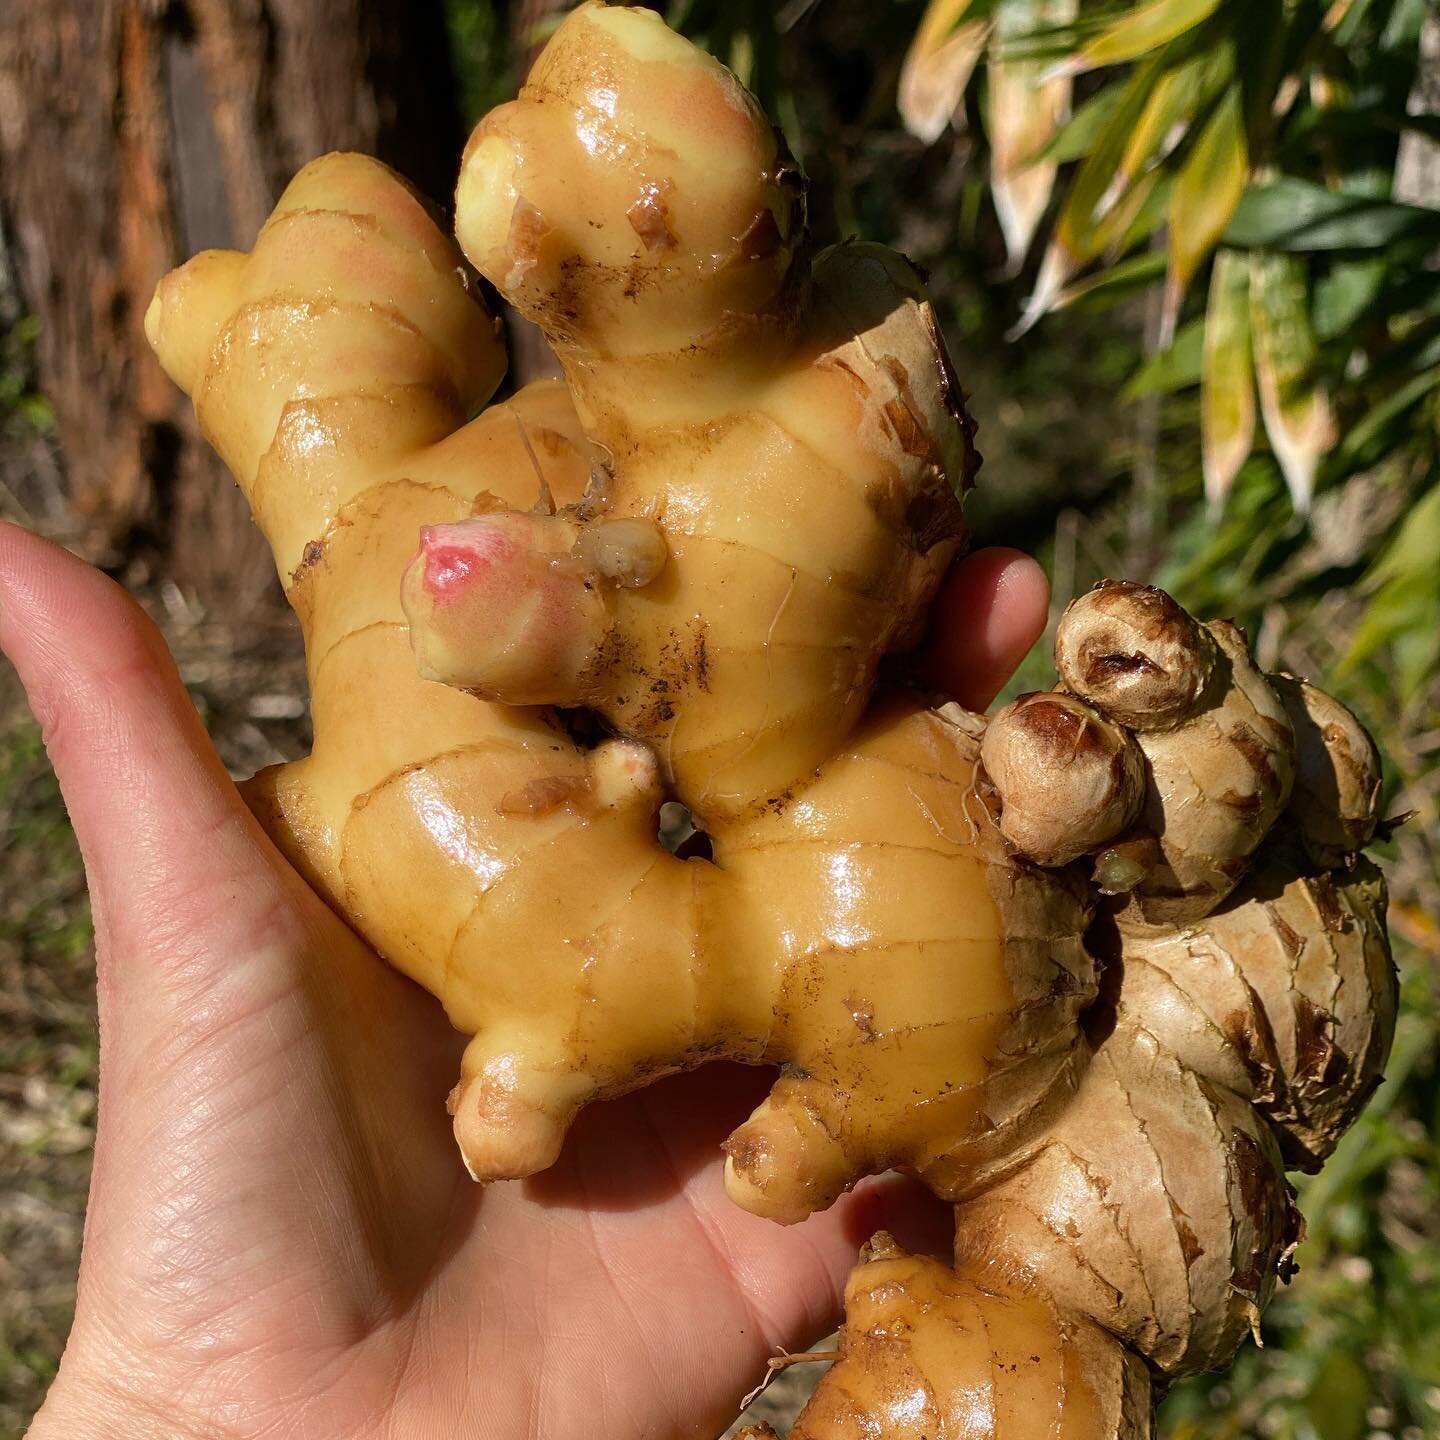 Spicy, fragrant and delicious!
Fresh ginger for the win! 😍 
.
.
.
#organic #ginger #smallscaleag #farmlife